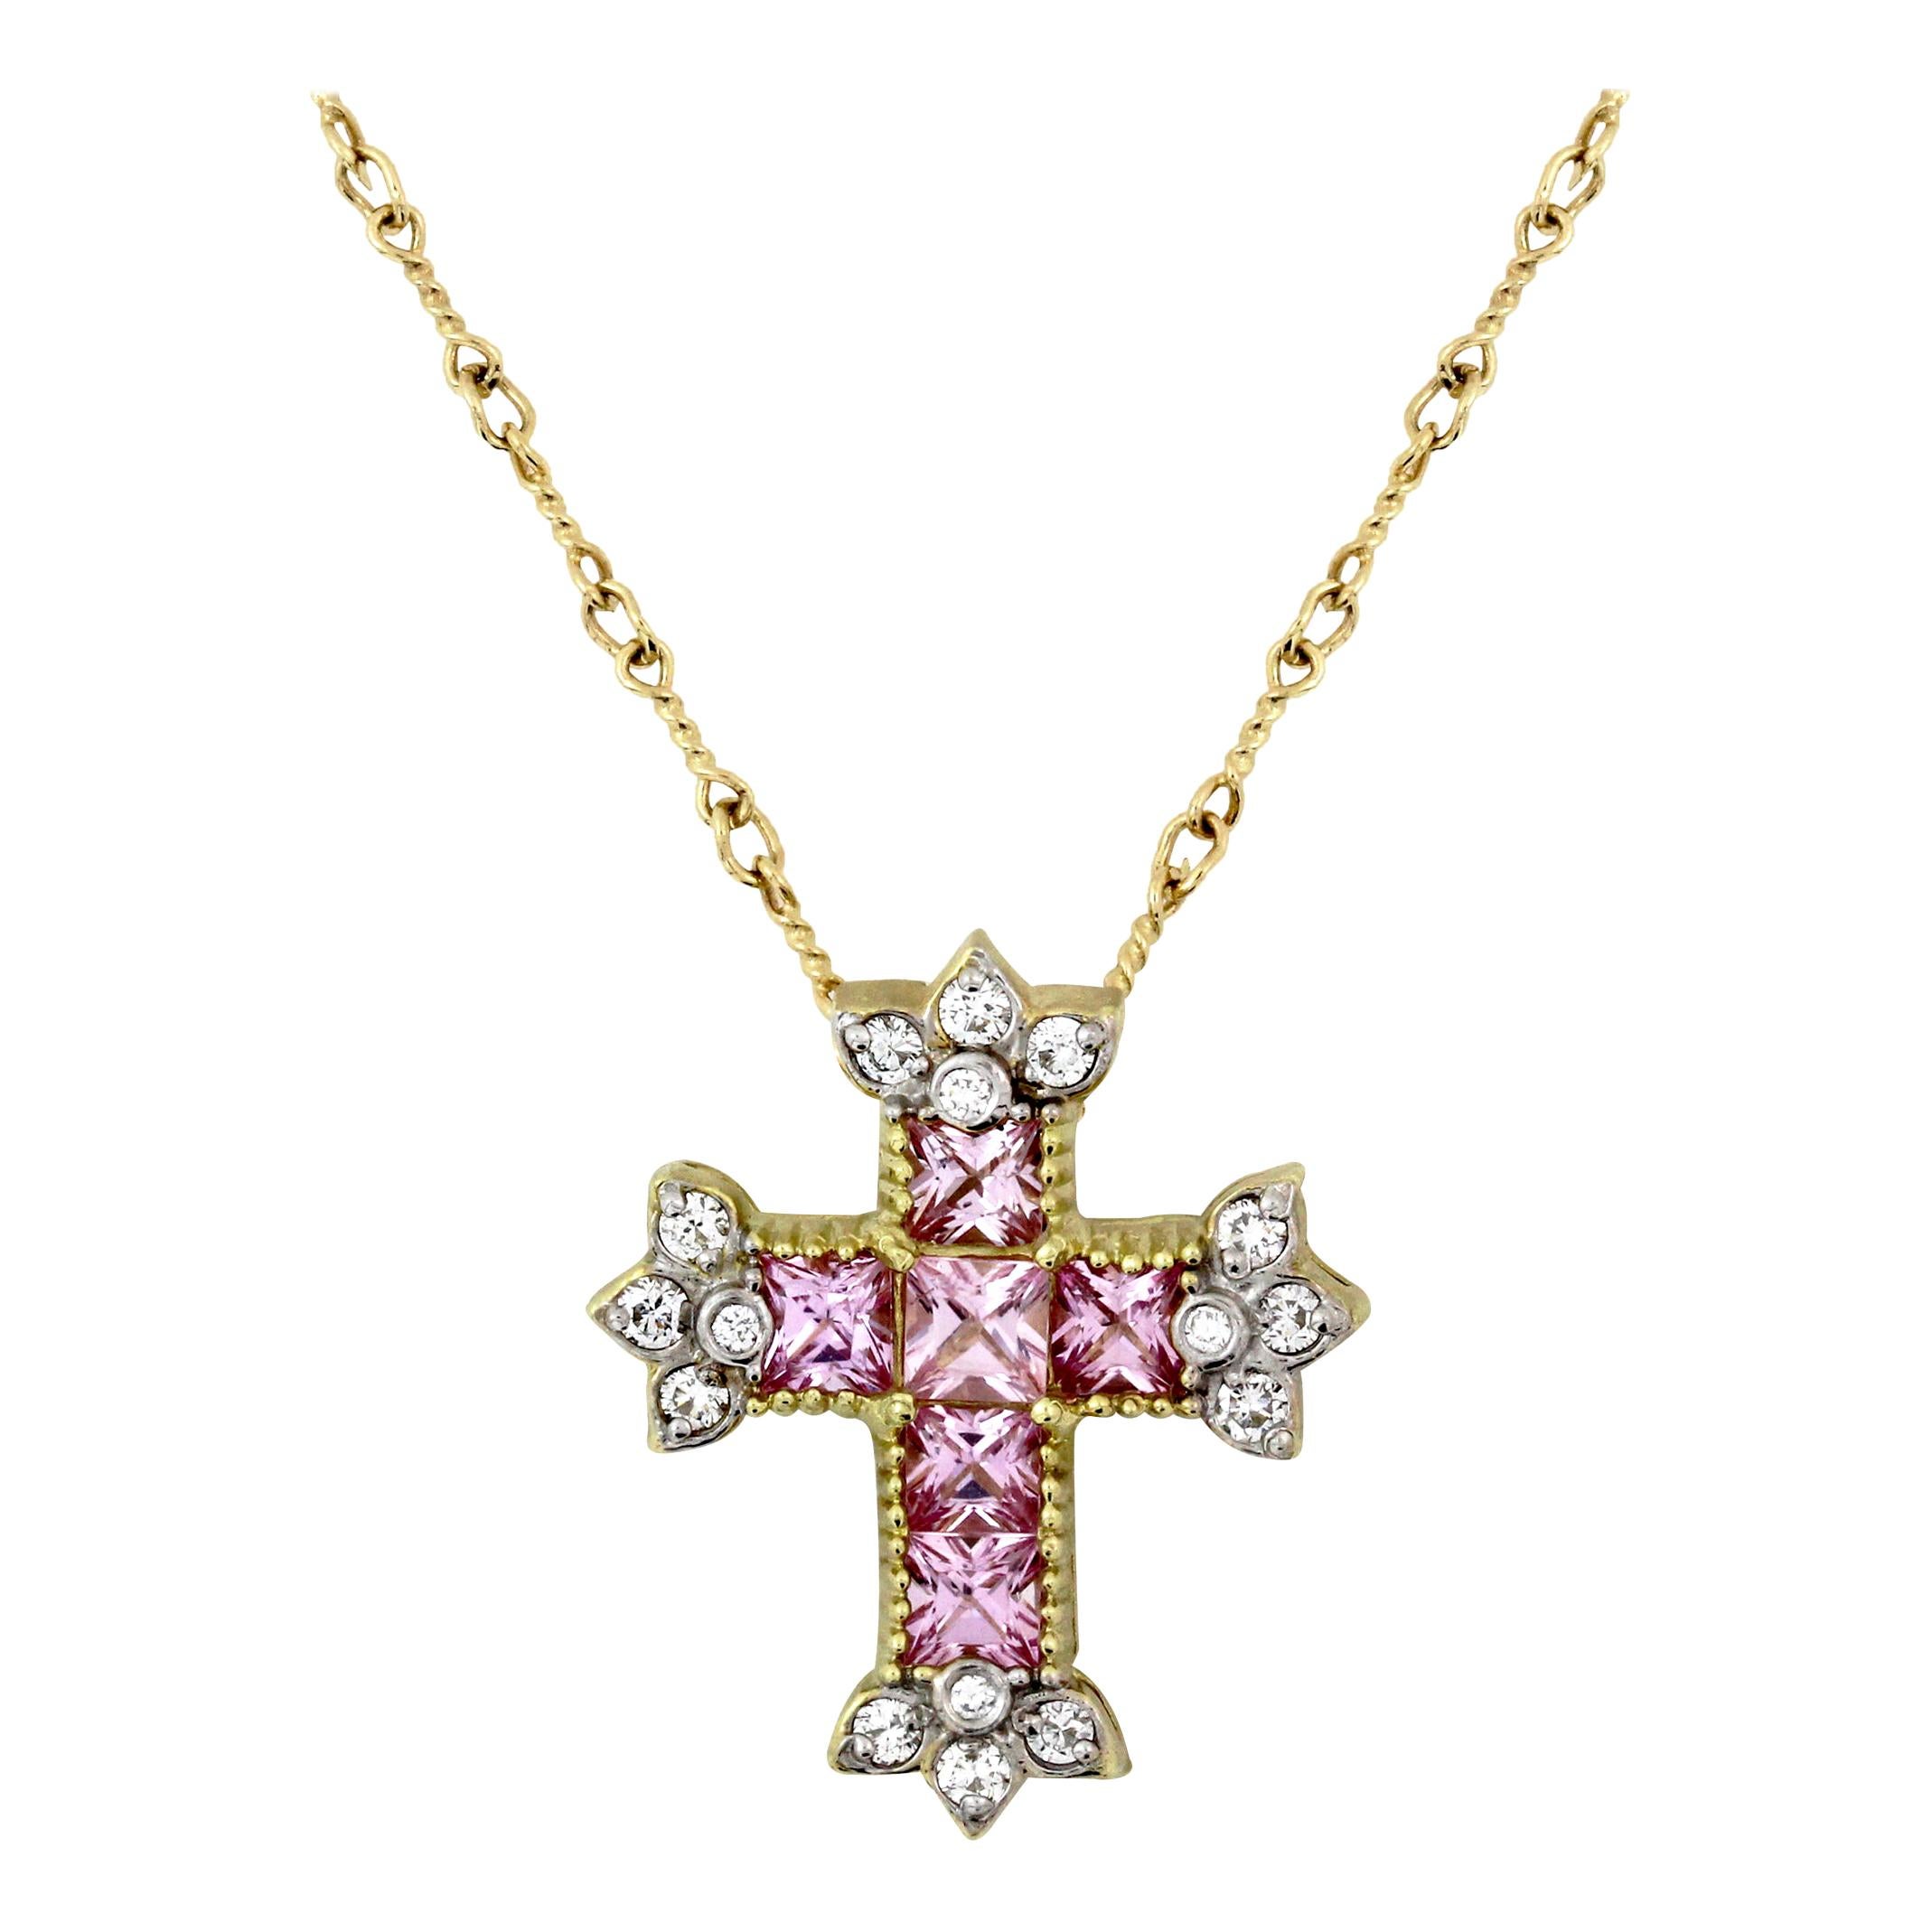 Stambolian Pink Sapphire Diamond Yellow Gold Cross Pendant with Chain Necklace